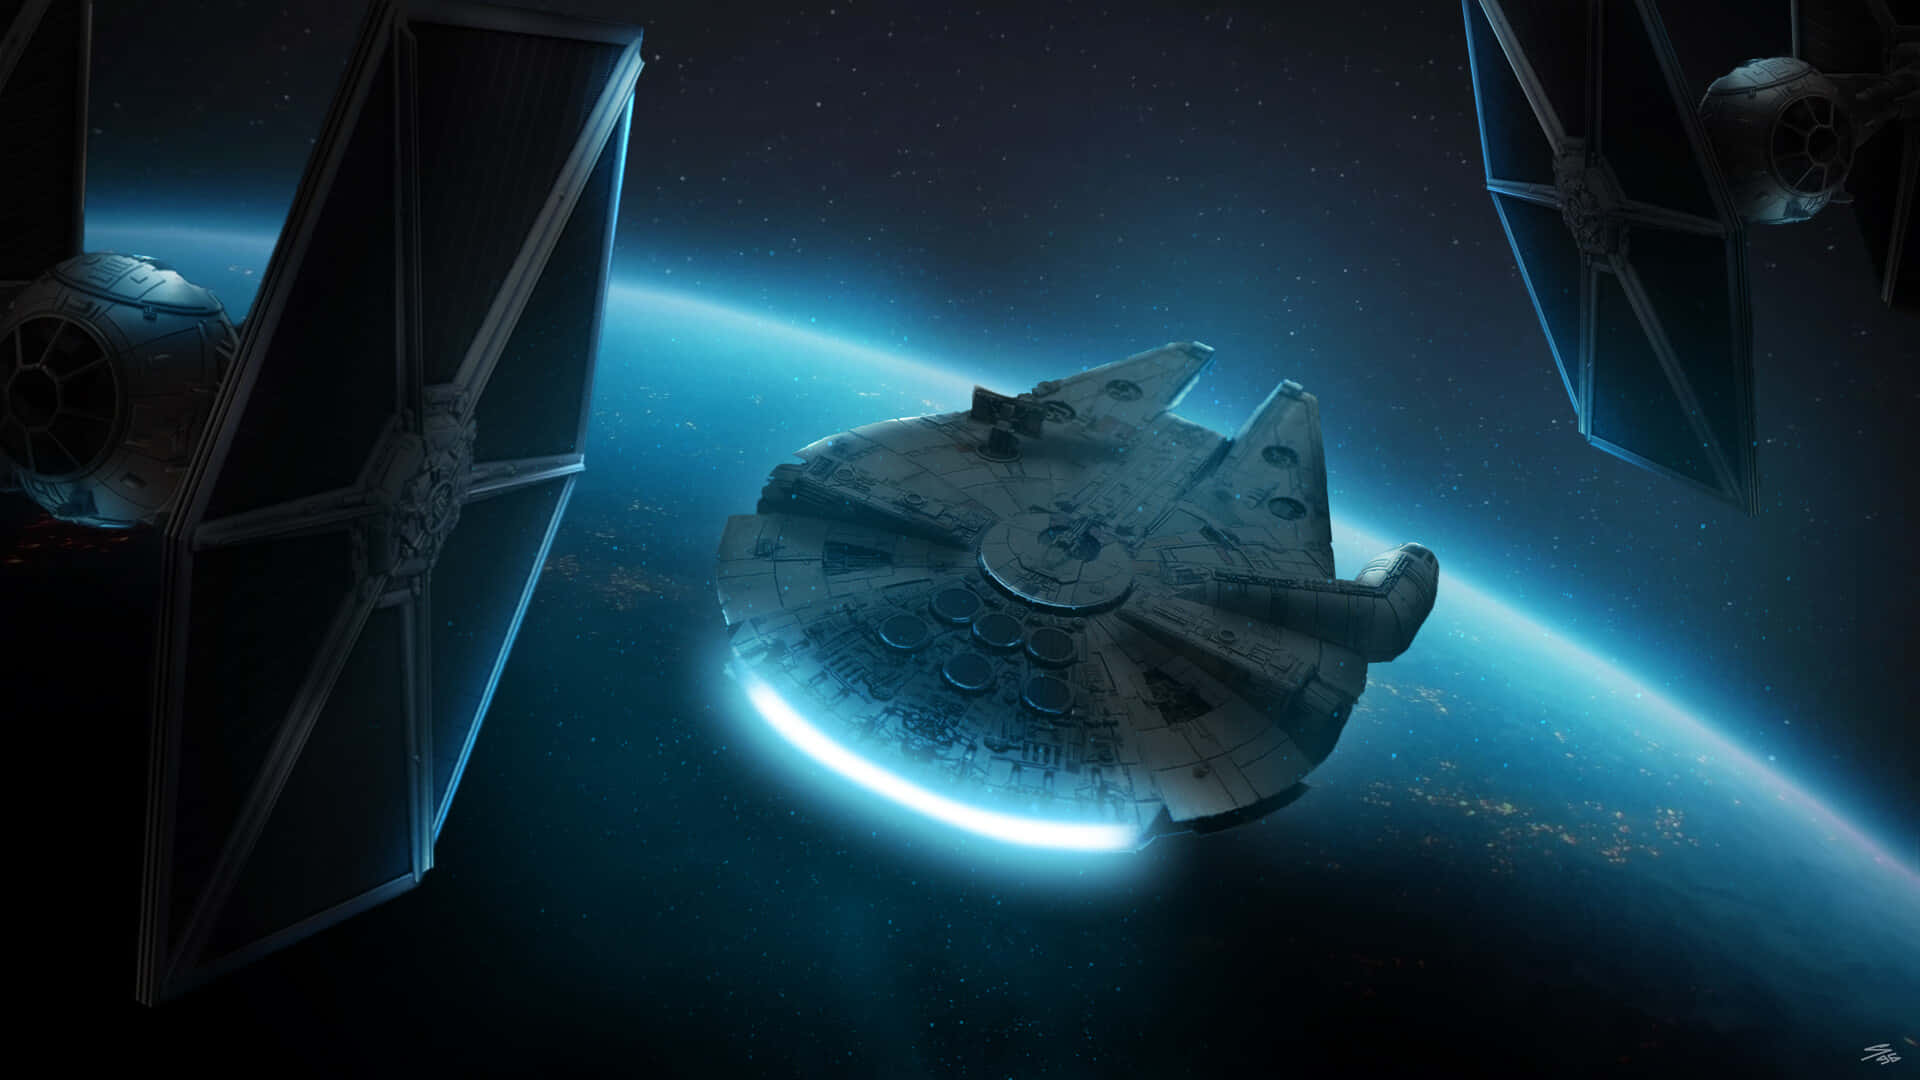 The Millenium Falcon Separates The Galactic Rebels From The Forces Of The Dark Side Wallpaper